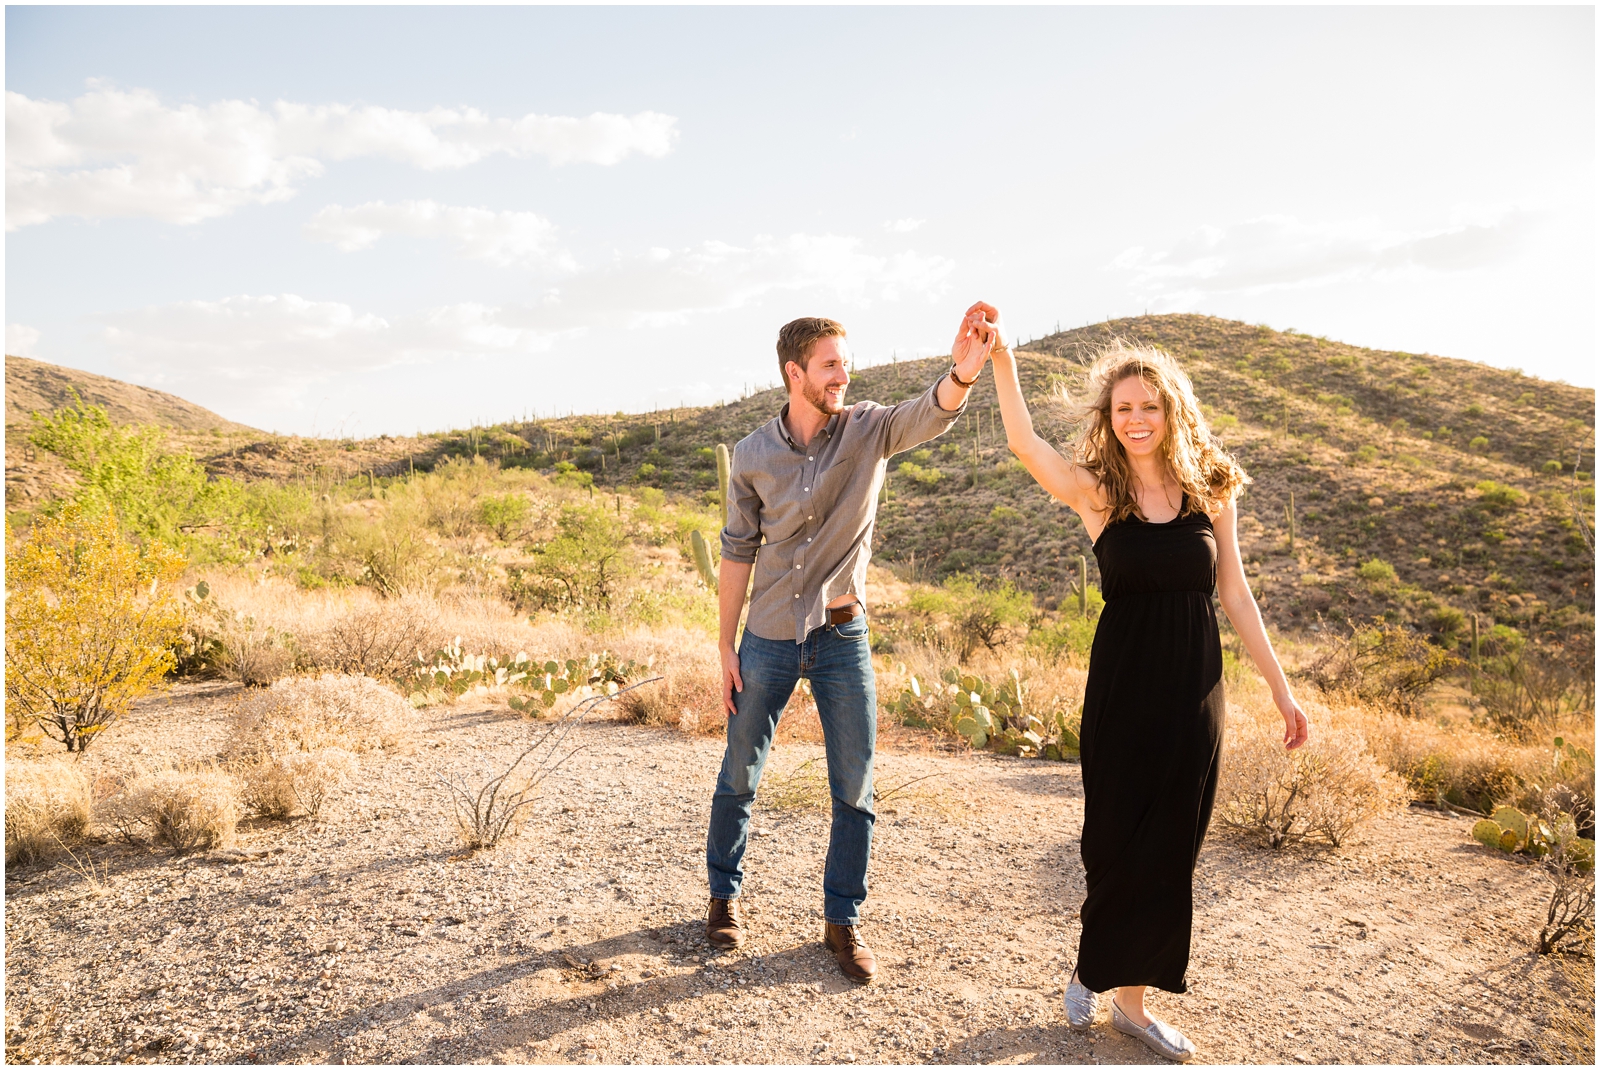 This couple had a blast on their Arizona adventure session. They laughed, hiked, danced, bouldered, and more all while having me, Clarissa Wylde of Clarissa Wylde Photography, document their love in Saguaro National Park.